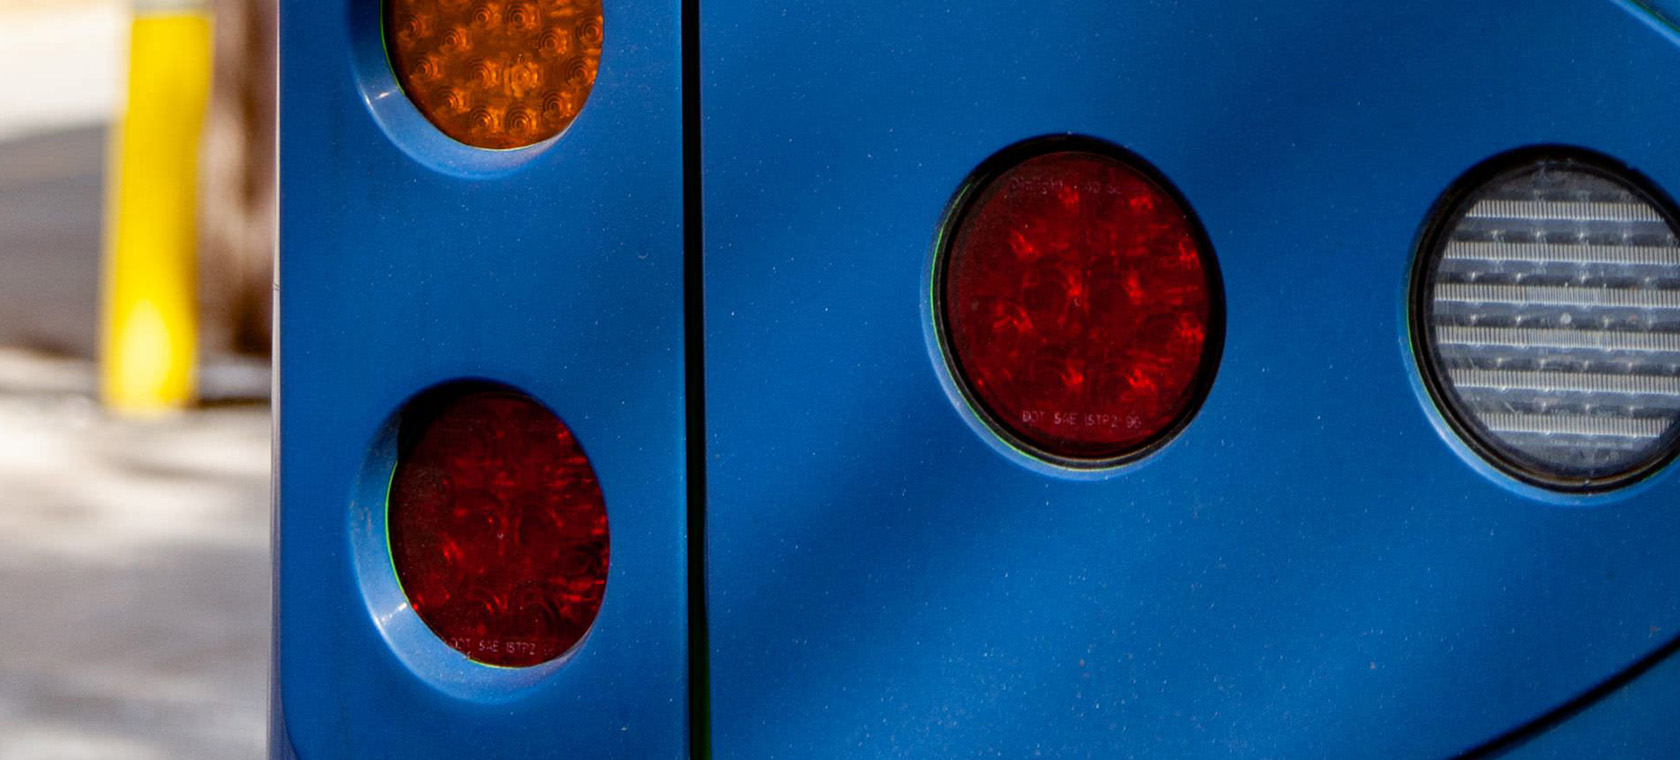 A close up view of a blue bus and its tail lights. 